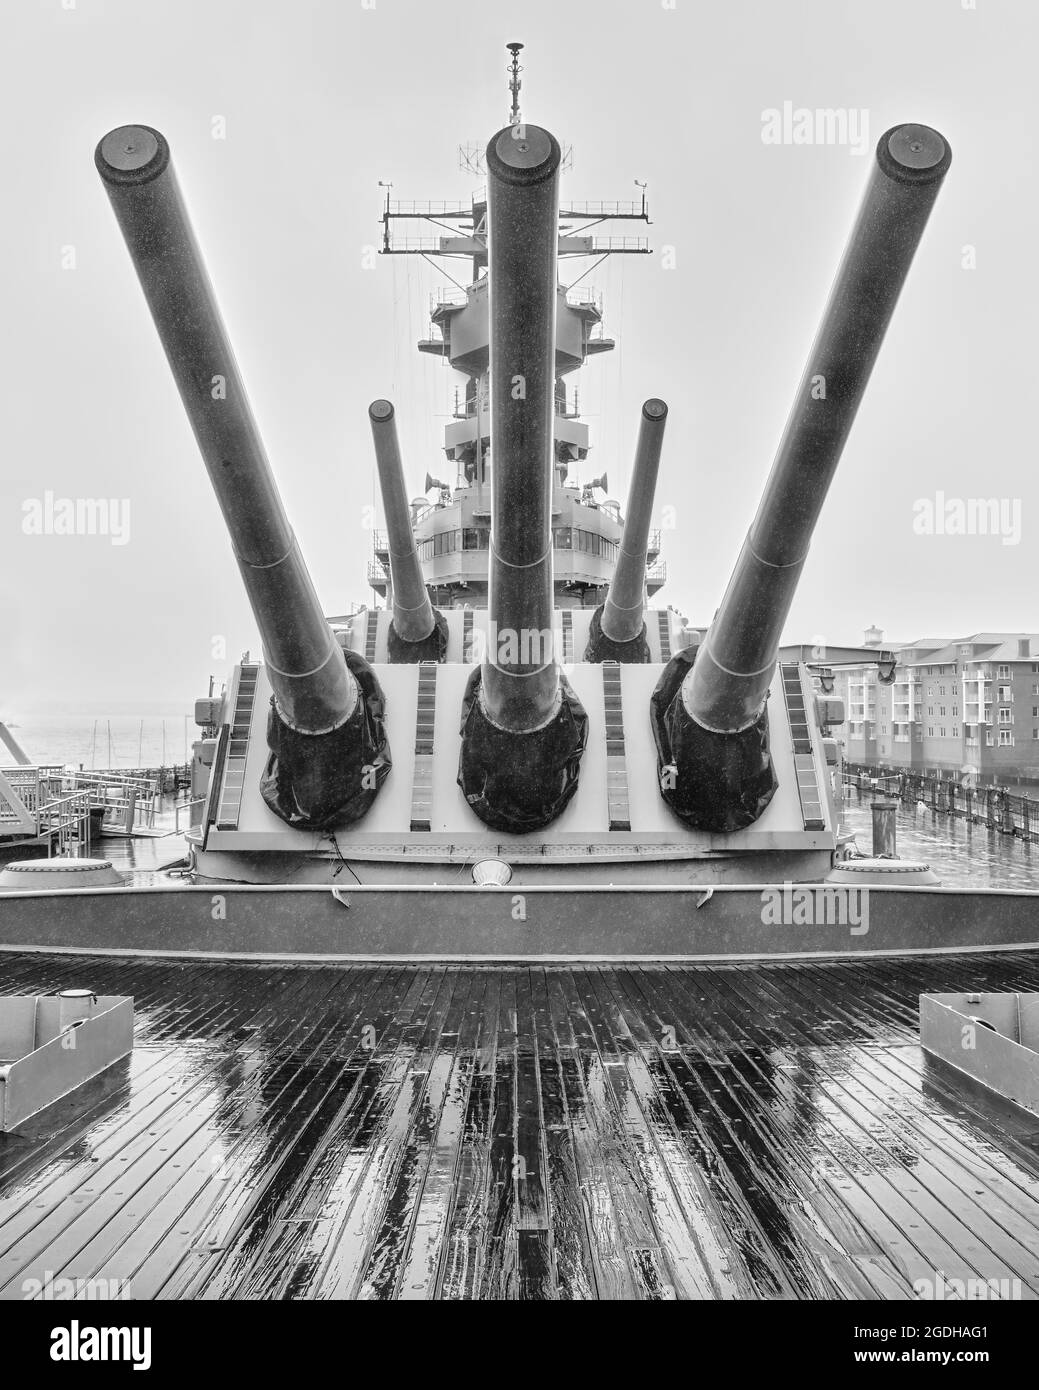 The USS Wisconsin was launched in 1944. Nicknamed “Wisky” is an Iowa-class battleship. Wisconsin's main battery consisted of nine 16 inch/50ca Stock Photo